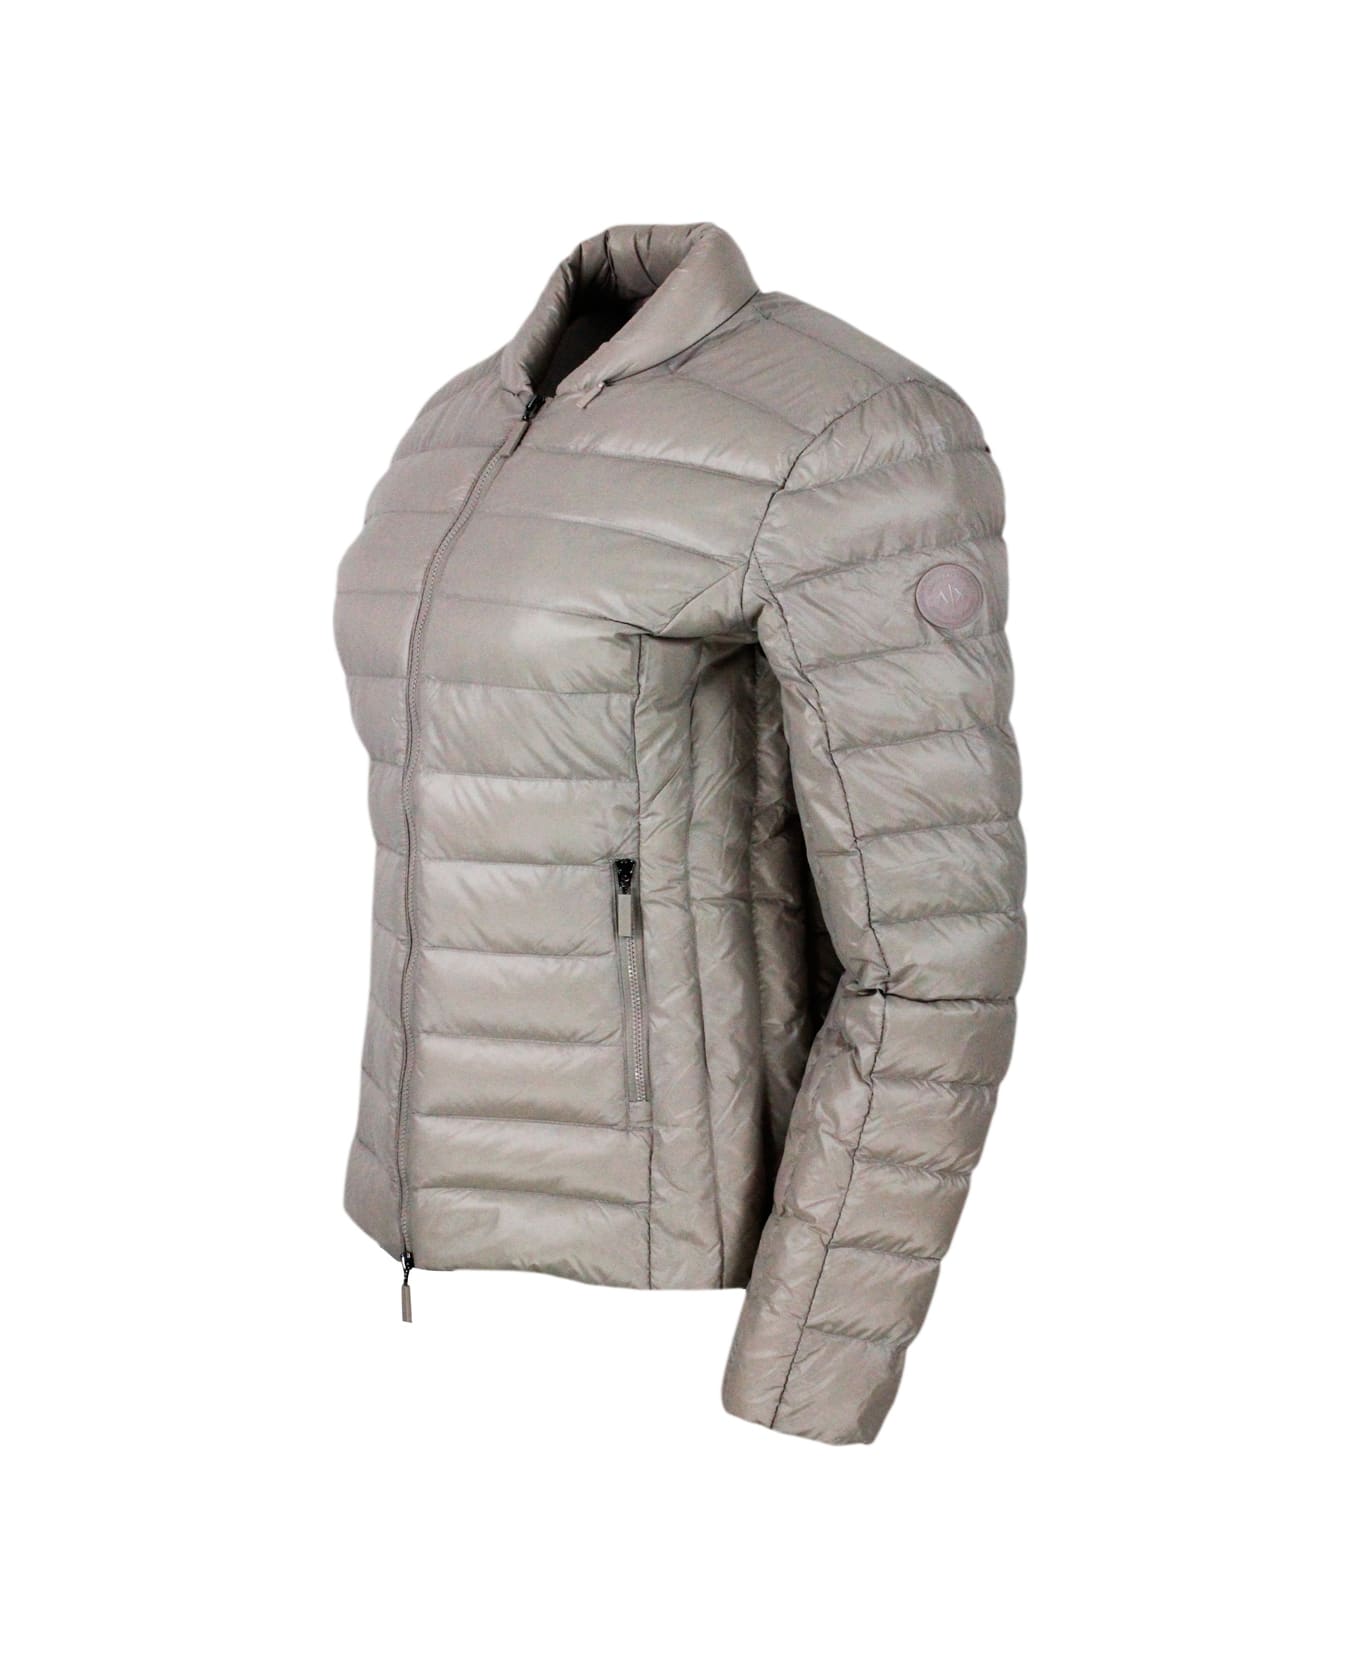 Armani Collezioni Lightweight 100 Gram Slim Down Jacket With Integrated Concealed Hood And Zip Closure - Beige ダウンジャケット